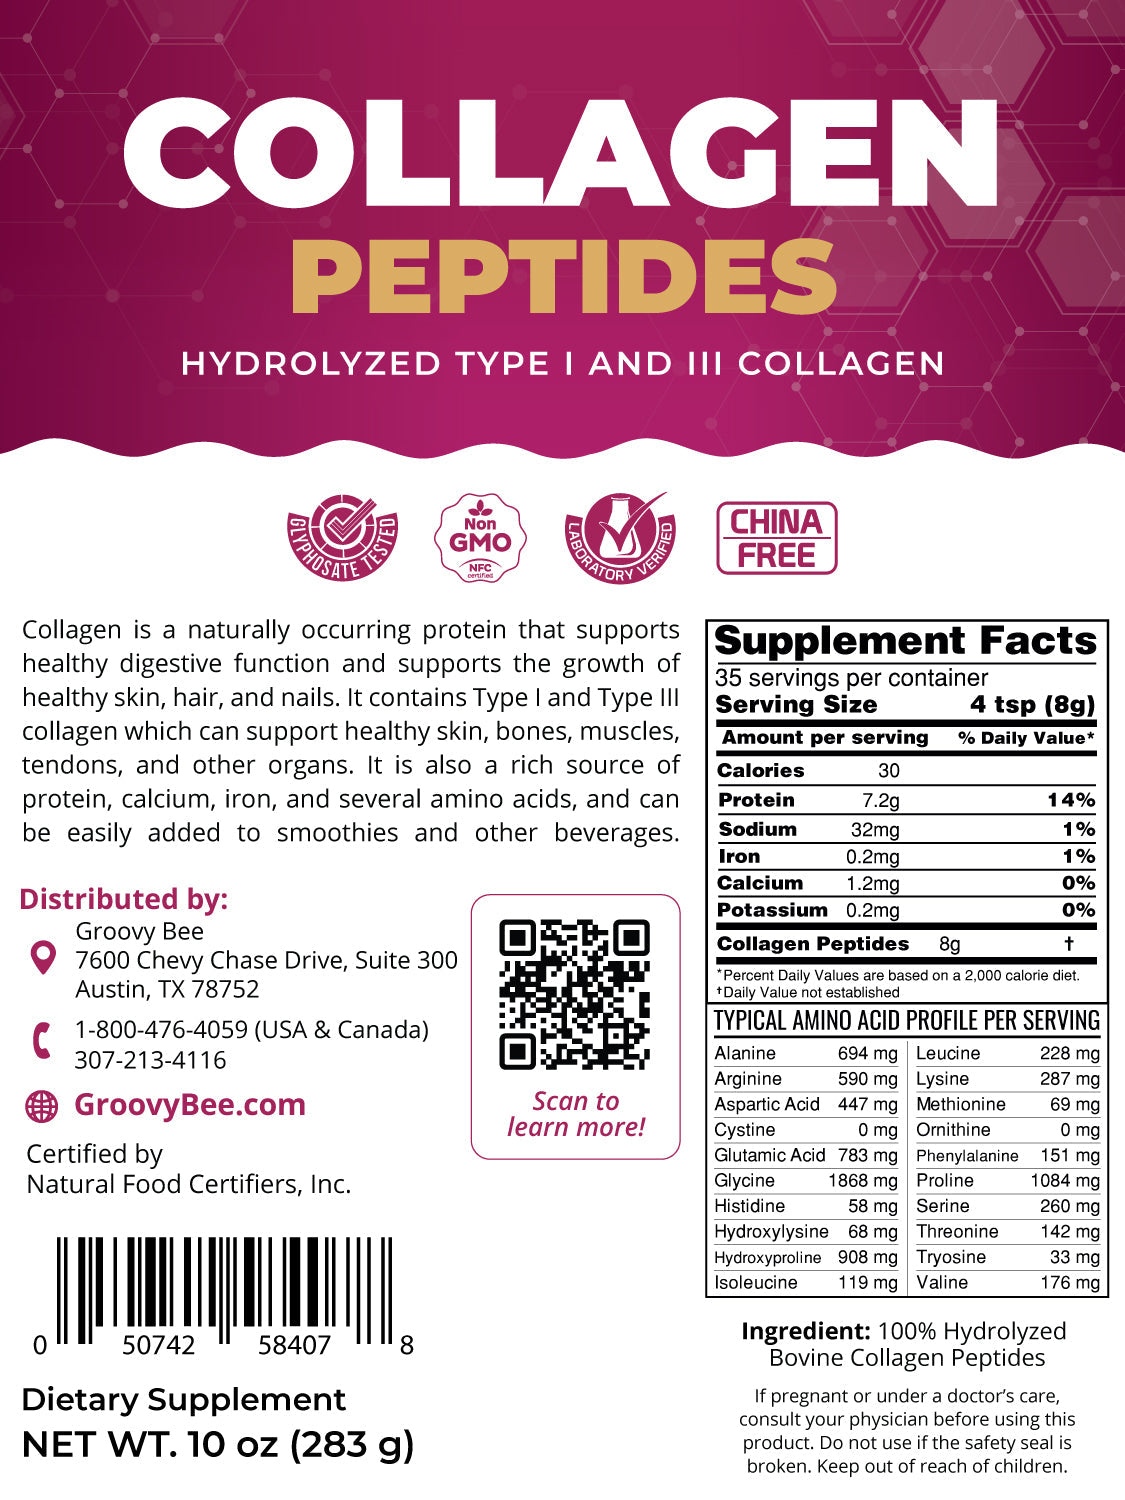 Groovy Bee® Collagen Peptides - Hydrolyzed Type I and III Collagen 10oz (283g) (3-Pack)